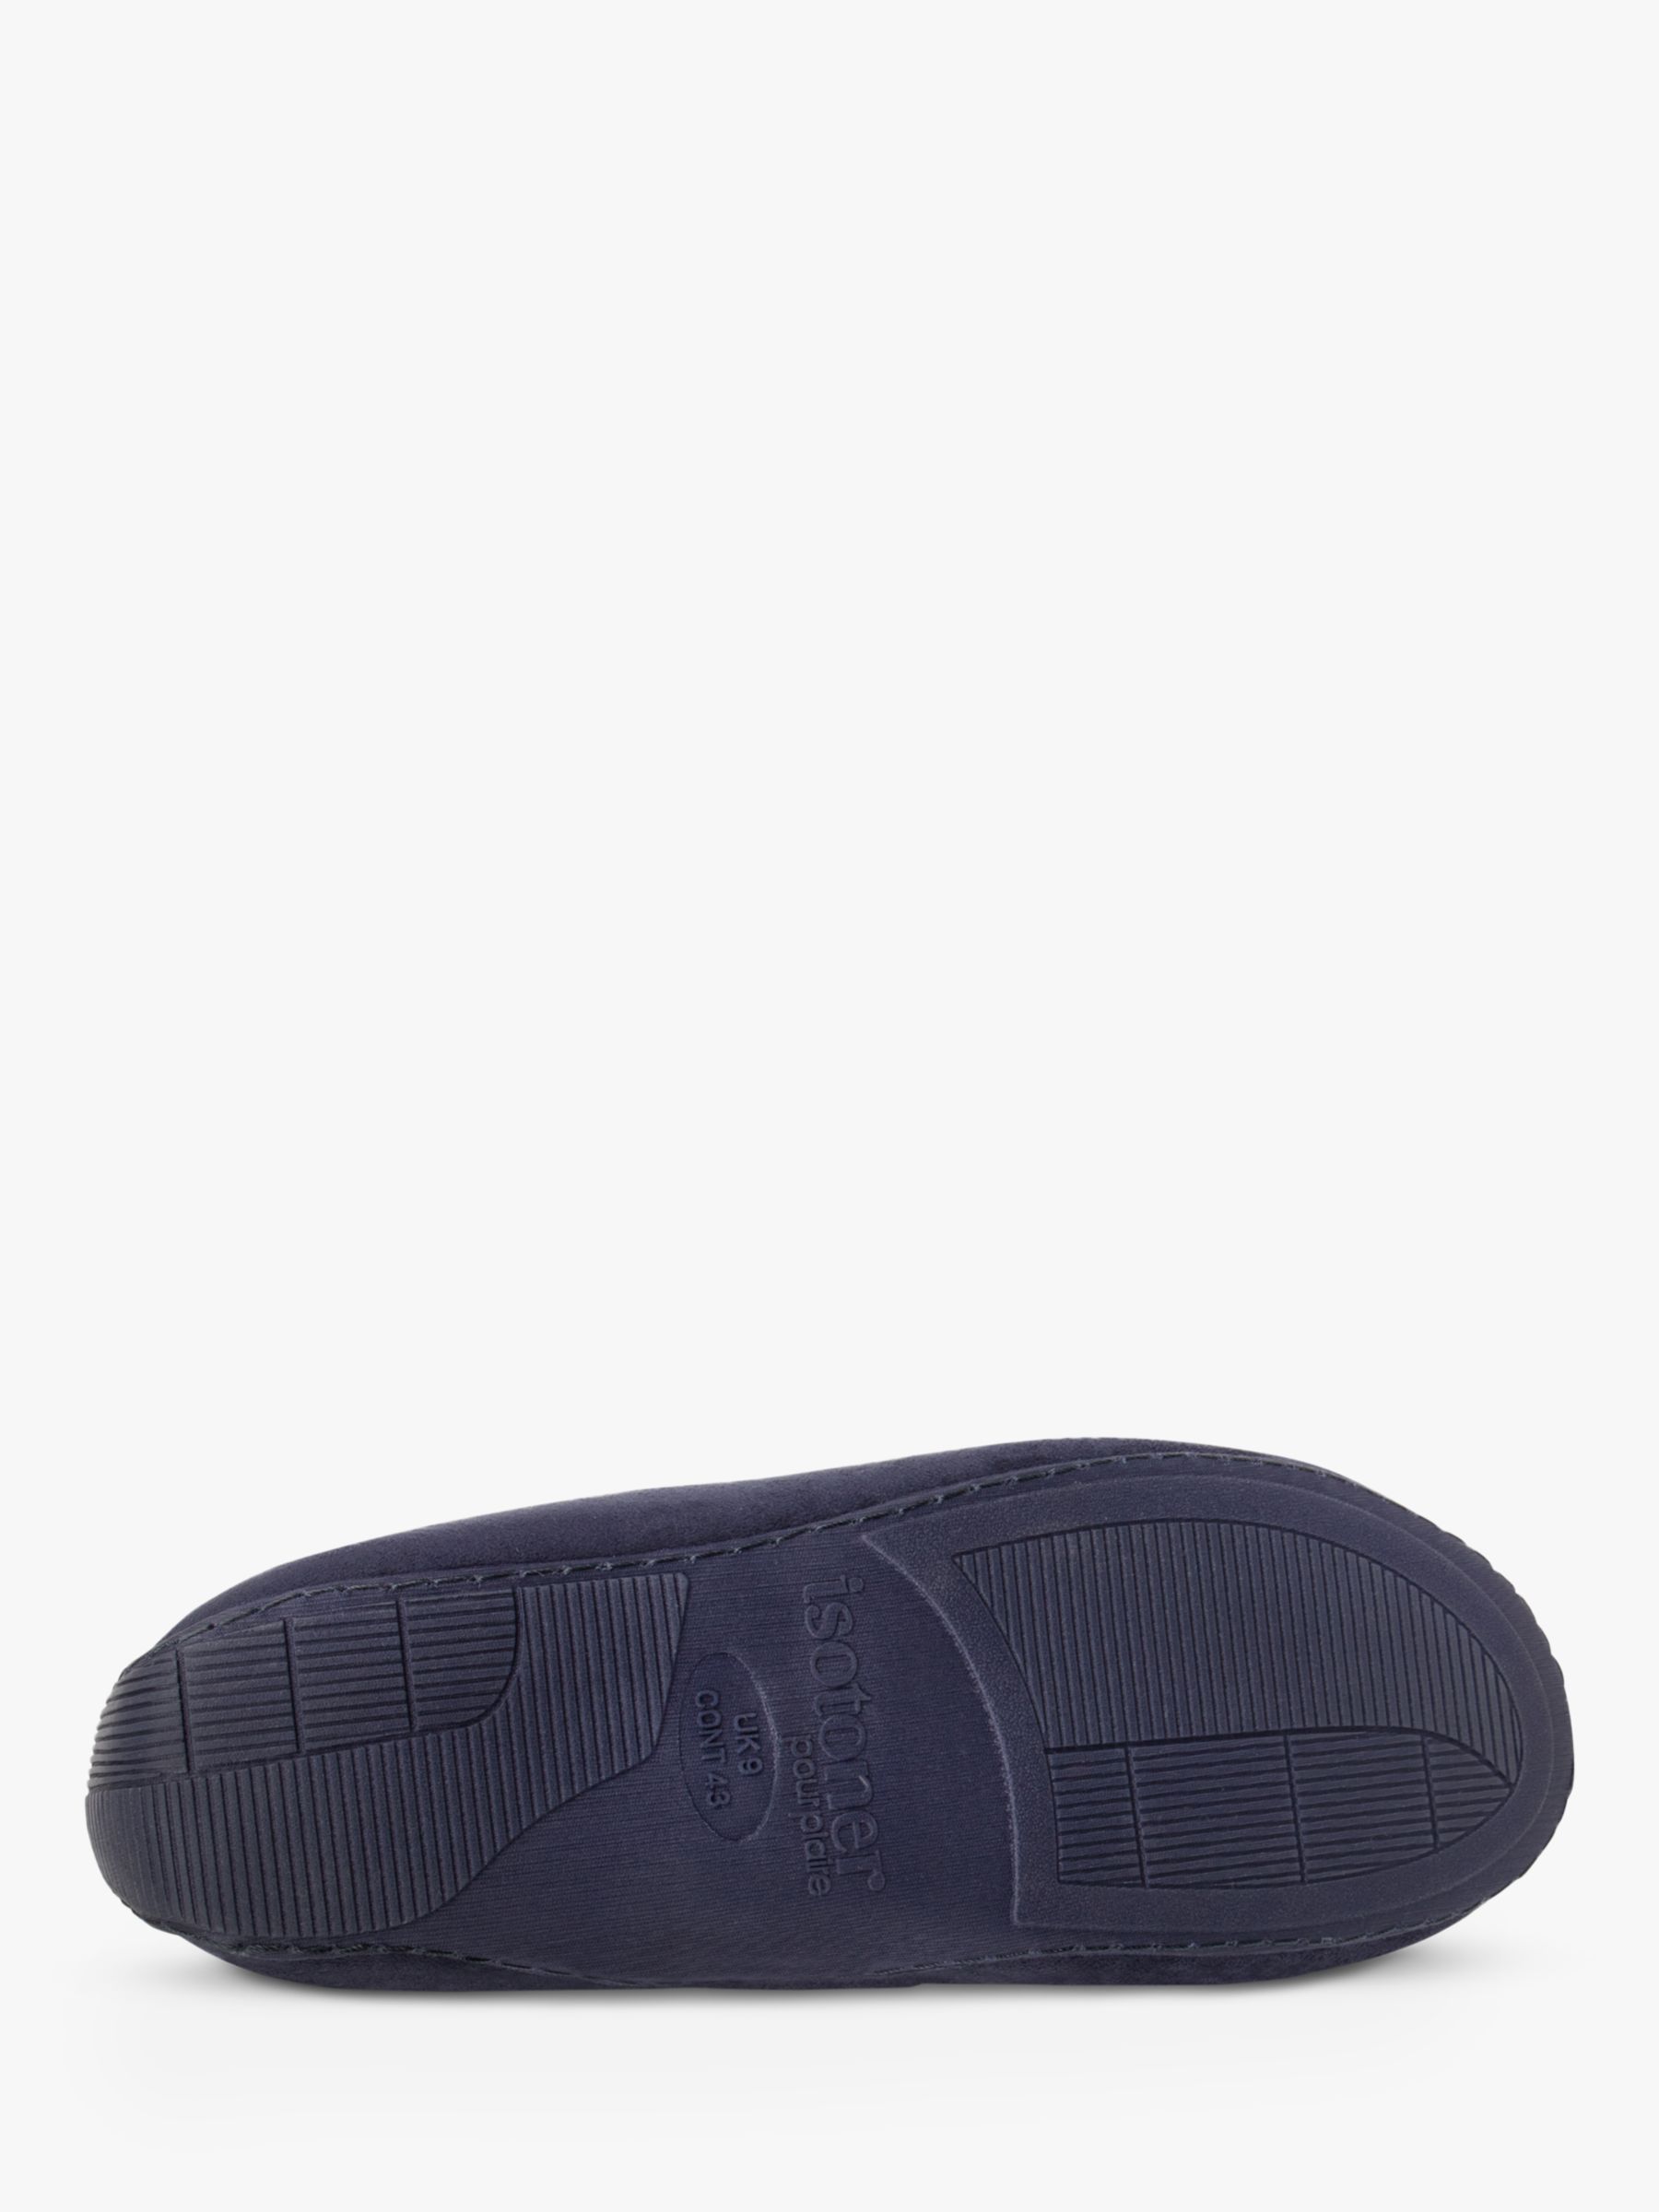 totes Airtex Suedette Moccasin Slippers, Navy, 8